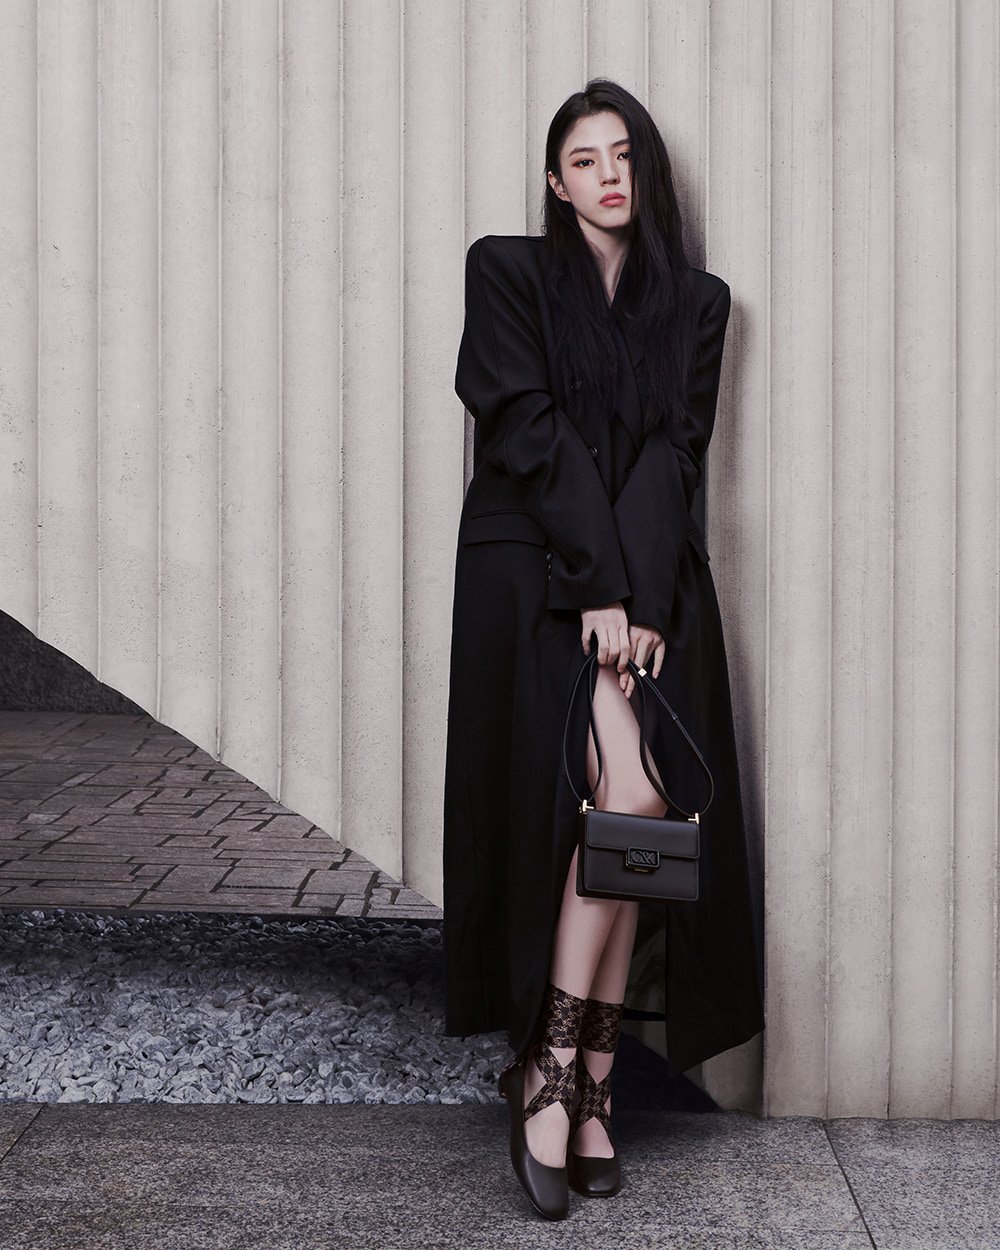 Women’s leather shoulder bag in black and leather monogram tie-around ballet flats, as seen on Han So Hee - CHARLES & KEITH